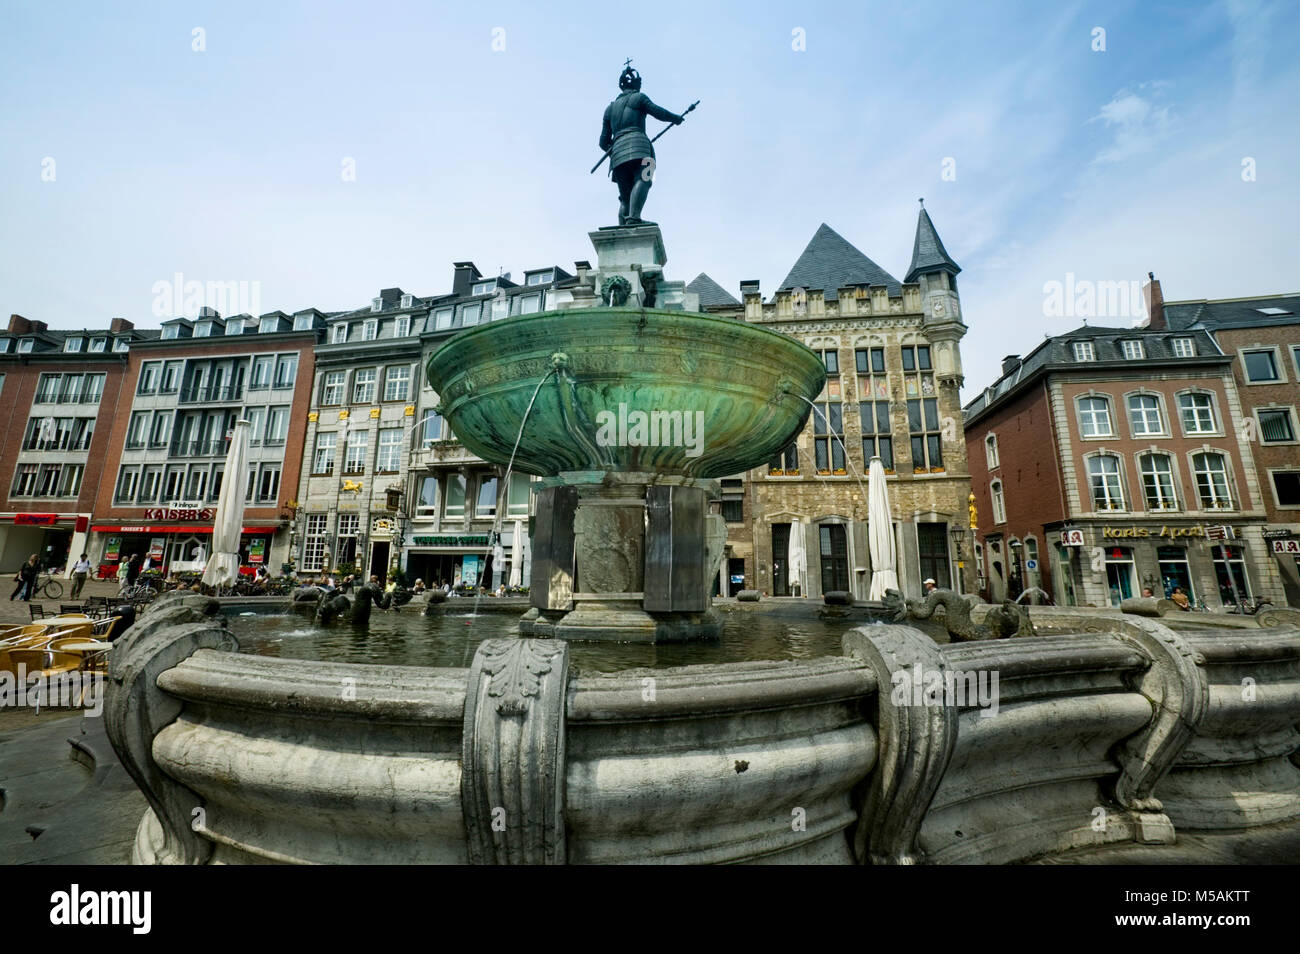 Charlemagne fountain, Aachen or Aix-la-Chapelle, North Rhine-Westphalia, Germany Stock Photo